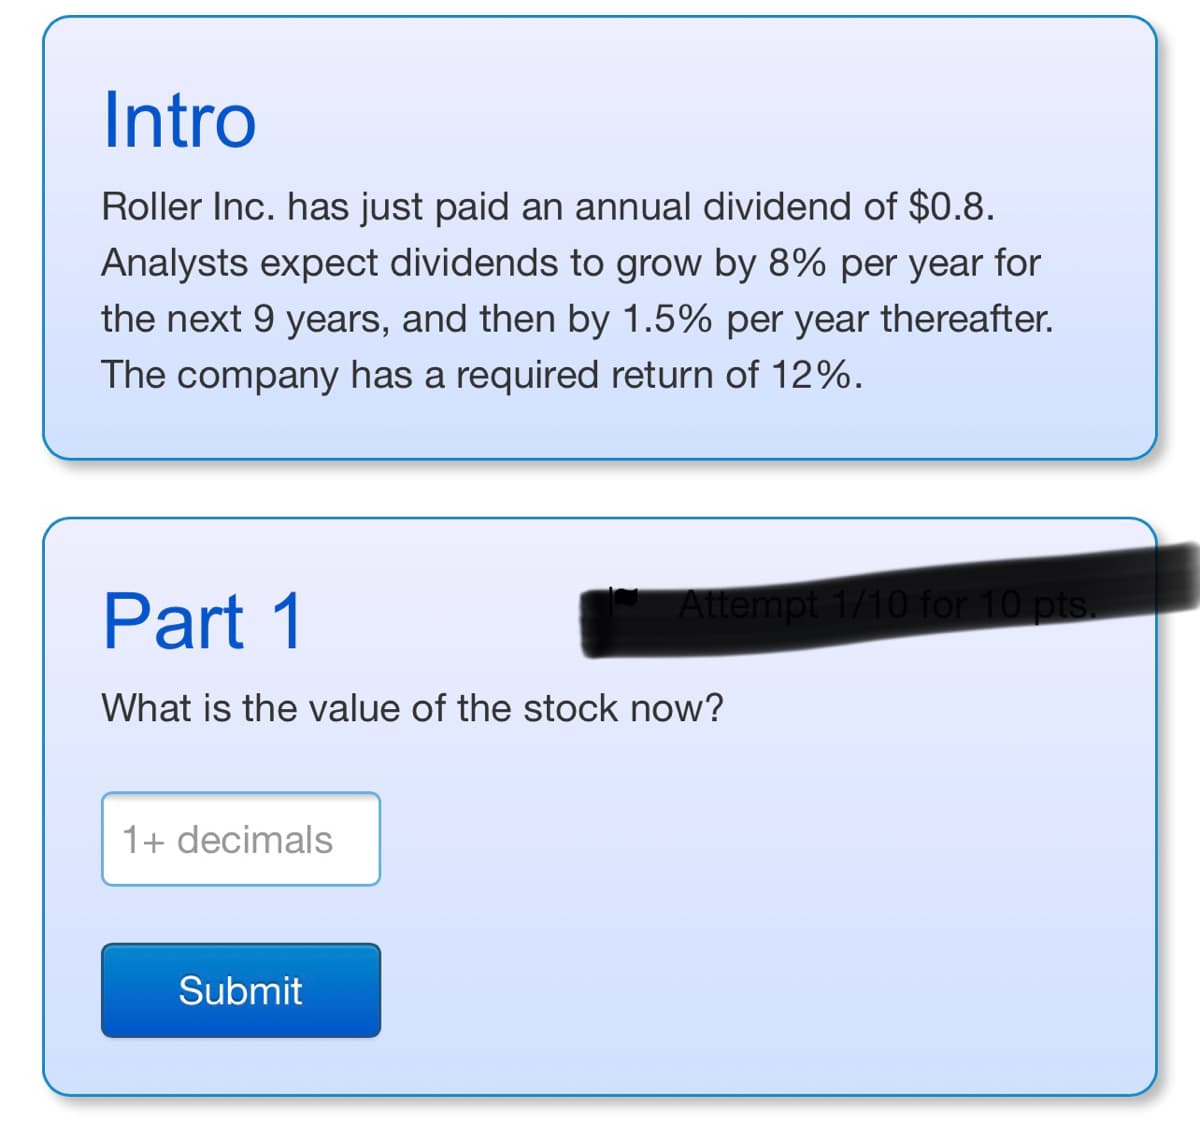 Intro
Roller Inc. has just paid an annual dividend of $0.8.
Analysts expect dividends to grow by 8% per year for
the next 9 years, and then by 1.5% per year thereafter.
The company has a required return of 12%.
Part 1
Attempt 1/10 for 10 pts.
What is the value of the stock now?
1+ decimals
Submit